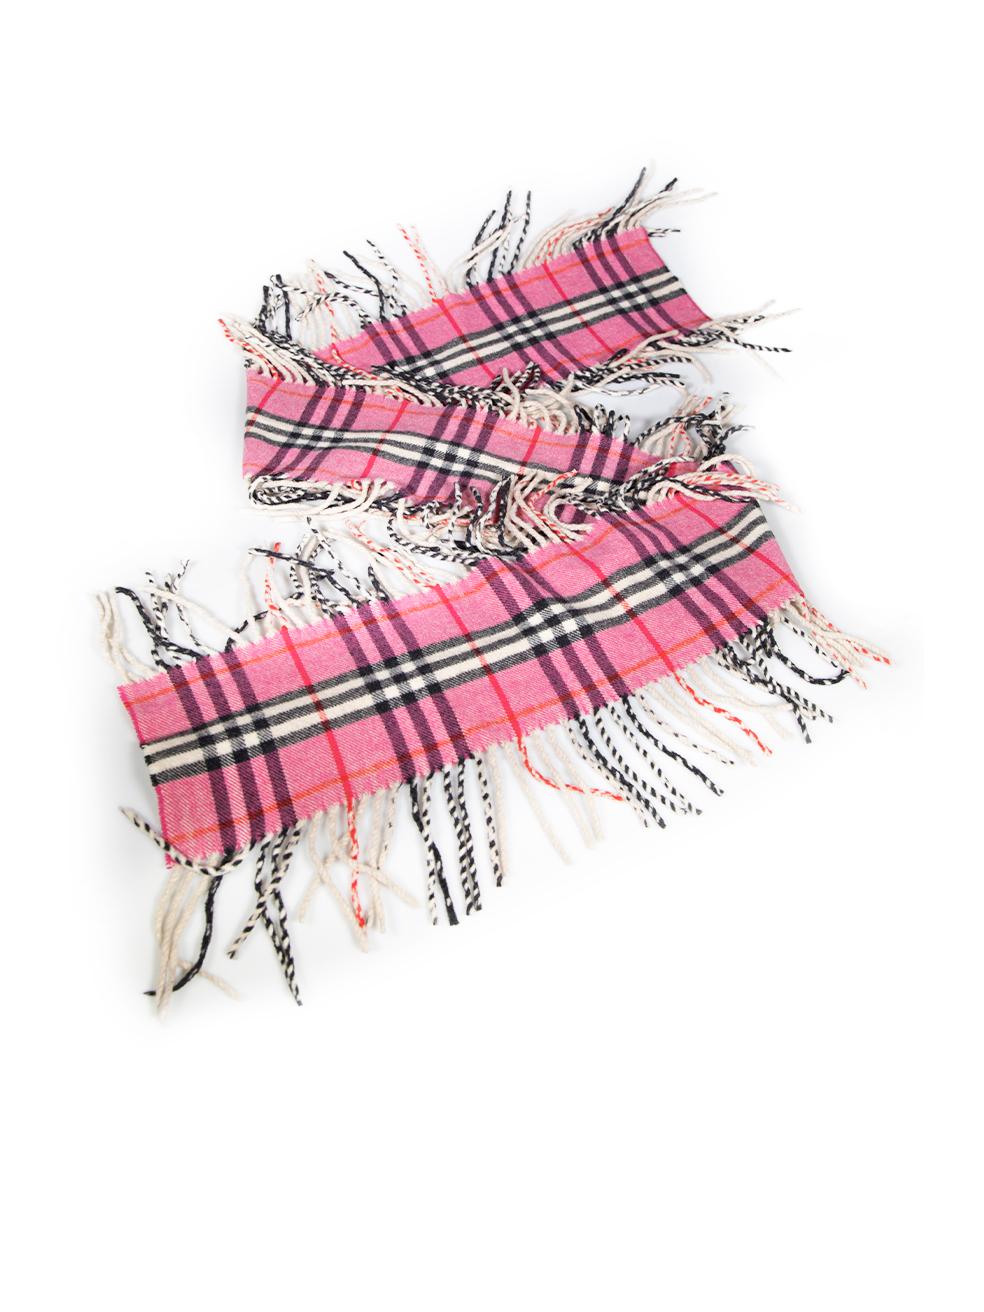 CONDITION is Good. General wear to scarf is evident. Moderate signs of wear to the knit with a small discoloured mark found near one end, a small tear at the edge and some of the fringing has partially unravelled on this used Burberry designer